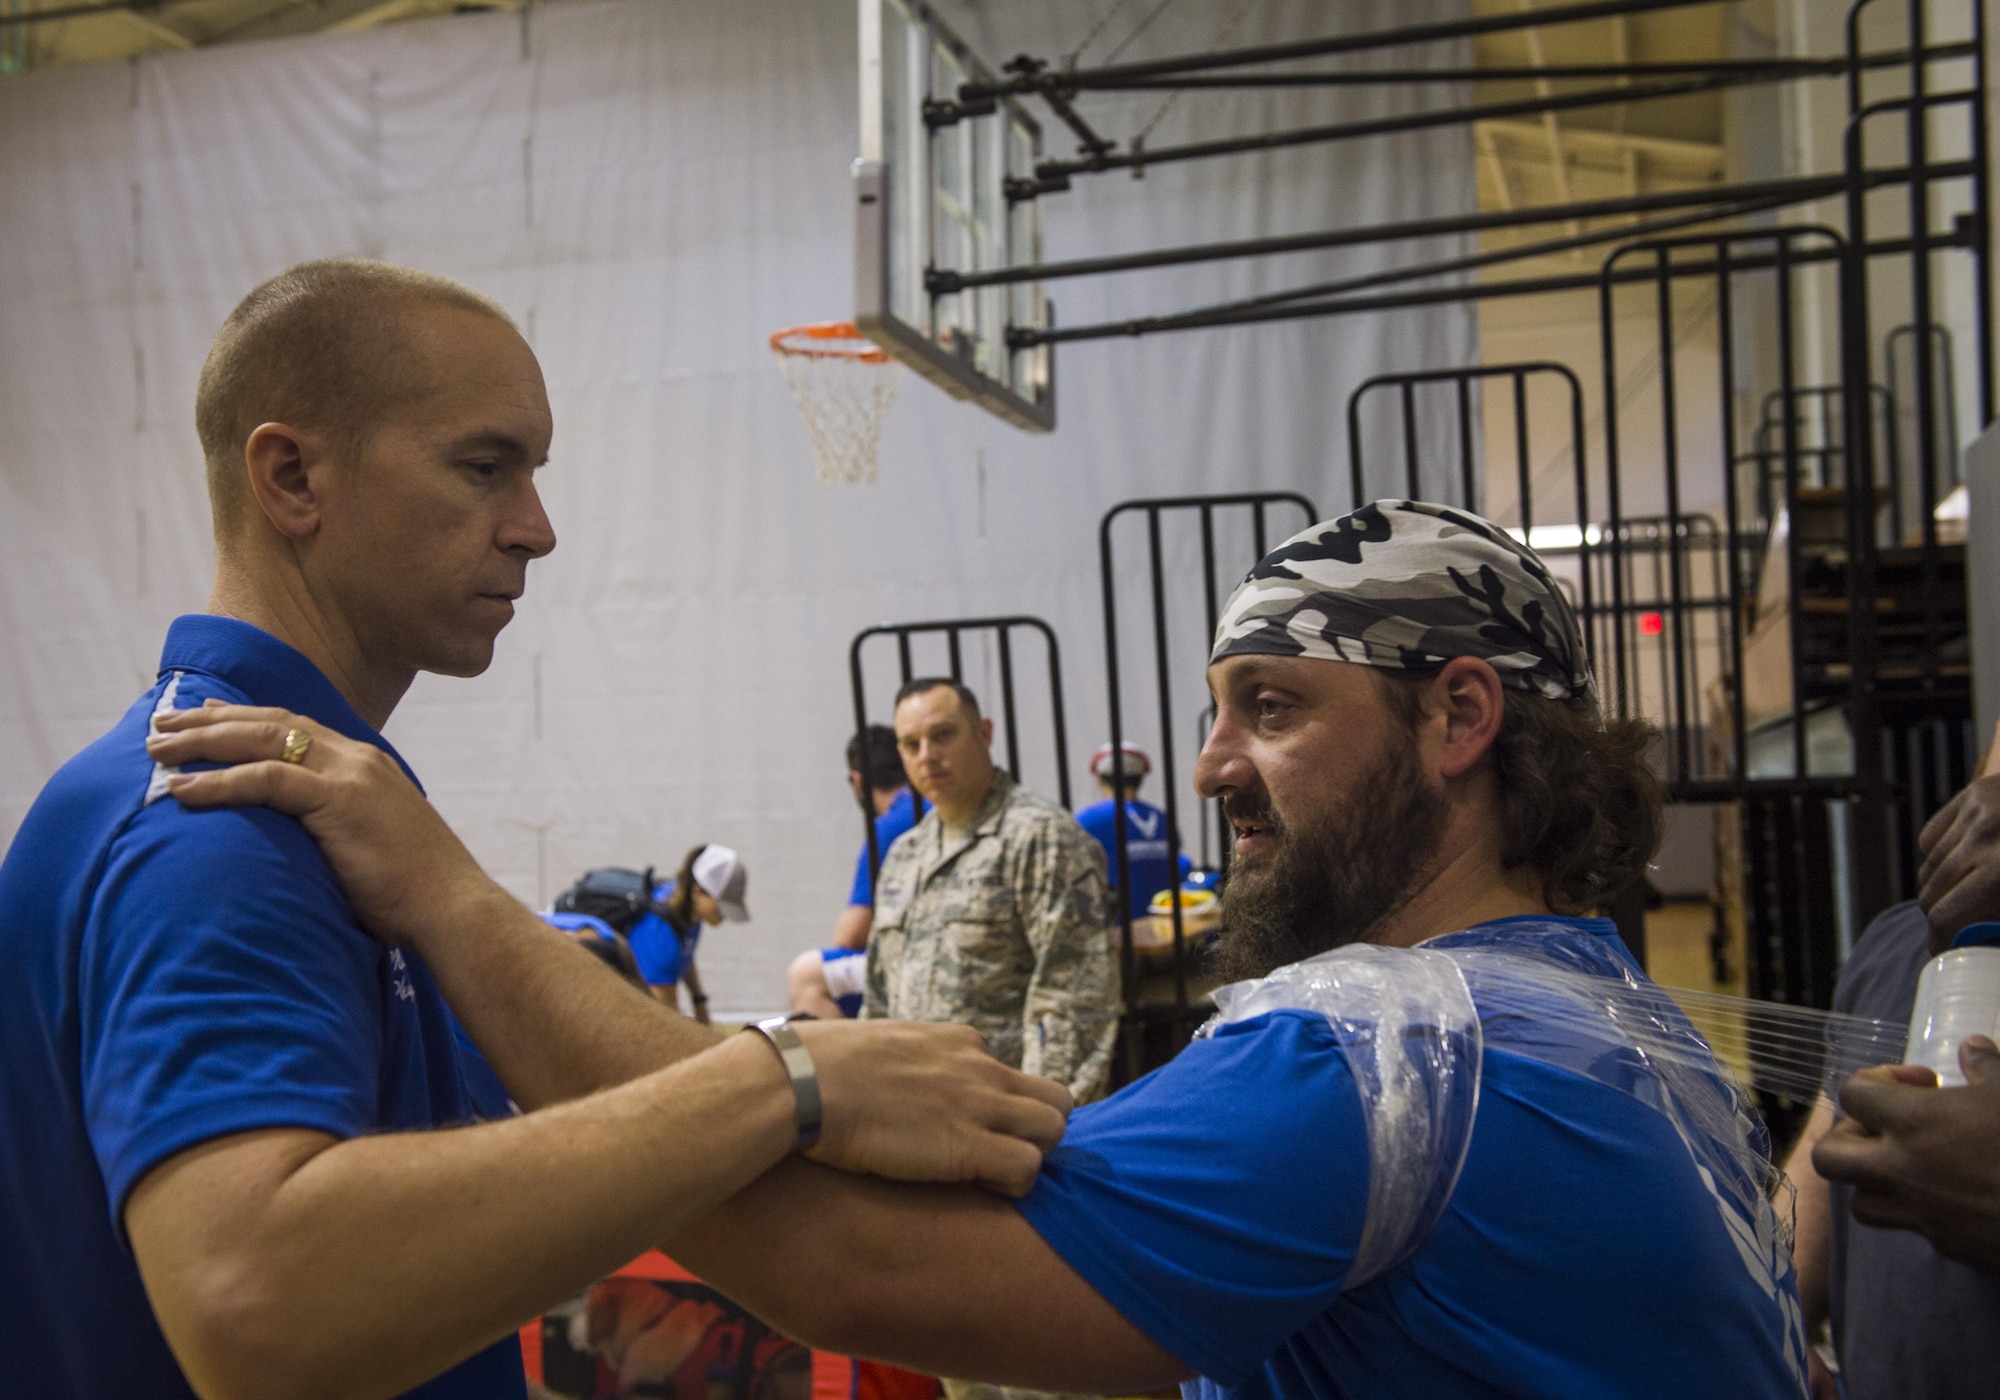 Maj. (Dr.) Sean Martin, the chief of sports medicine with Air Force Special Operations Command Office of the Surgeon General, helps retired Tech. Sgt. Cory Anderson, a wounded-warrior athlete, ice his shoulder after sitting volleyball practice at Hurlburt Field, Fla., April 4, 2016. Teams participate in seven sports to include archery, cycling, shooting, sitting-volleyball, swimming, track and field, and wheelchair basketball. (U.S. Air Force photo by Staff Sgt. Marleah Miller)